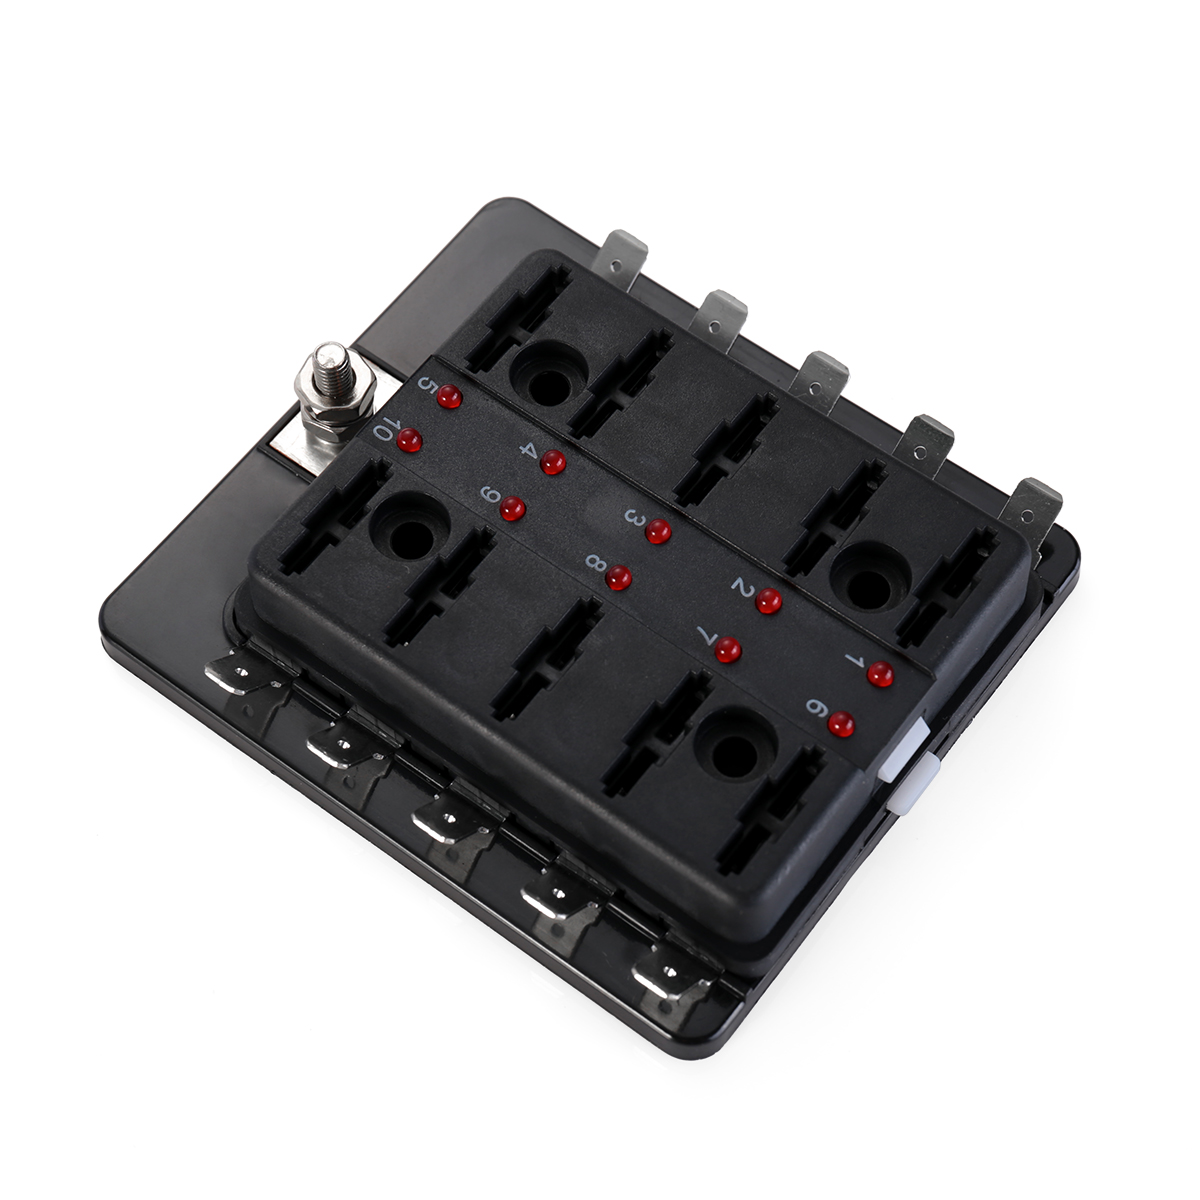 Car Boat 1 in 10 Way Blade Fuse Box Holder with LED Warning Light Box